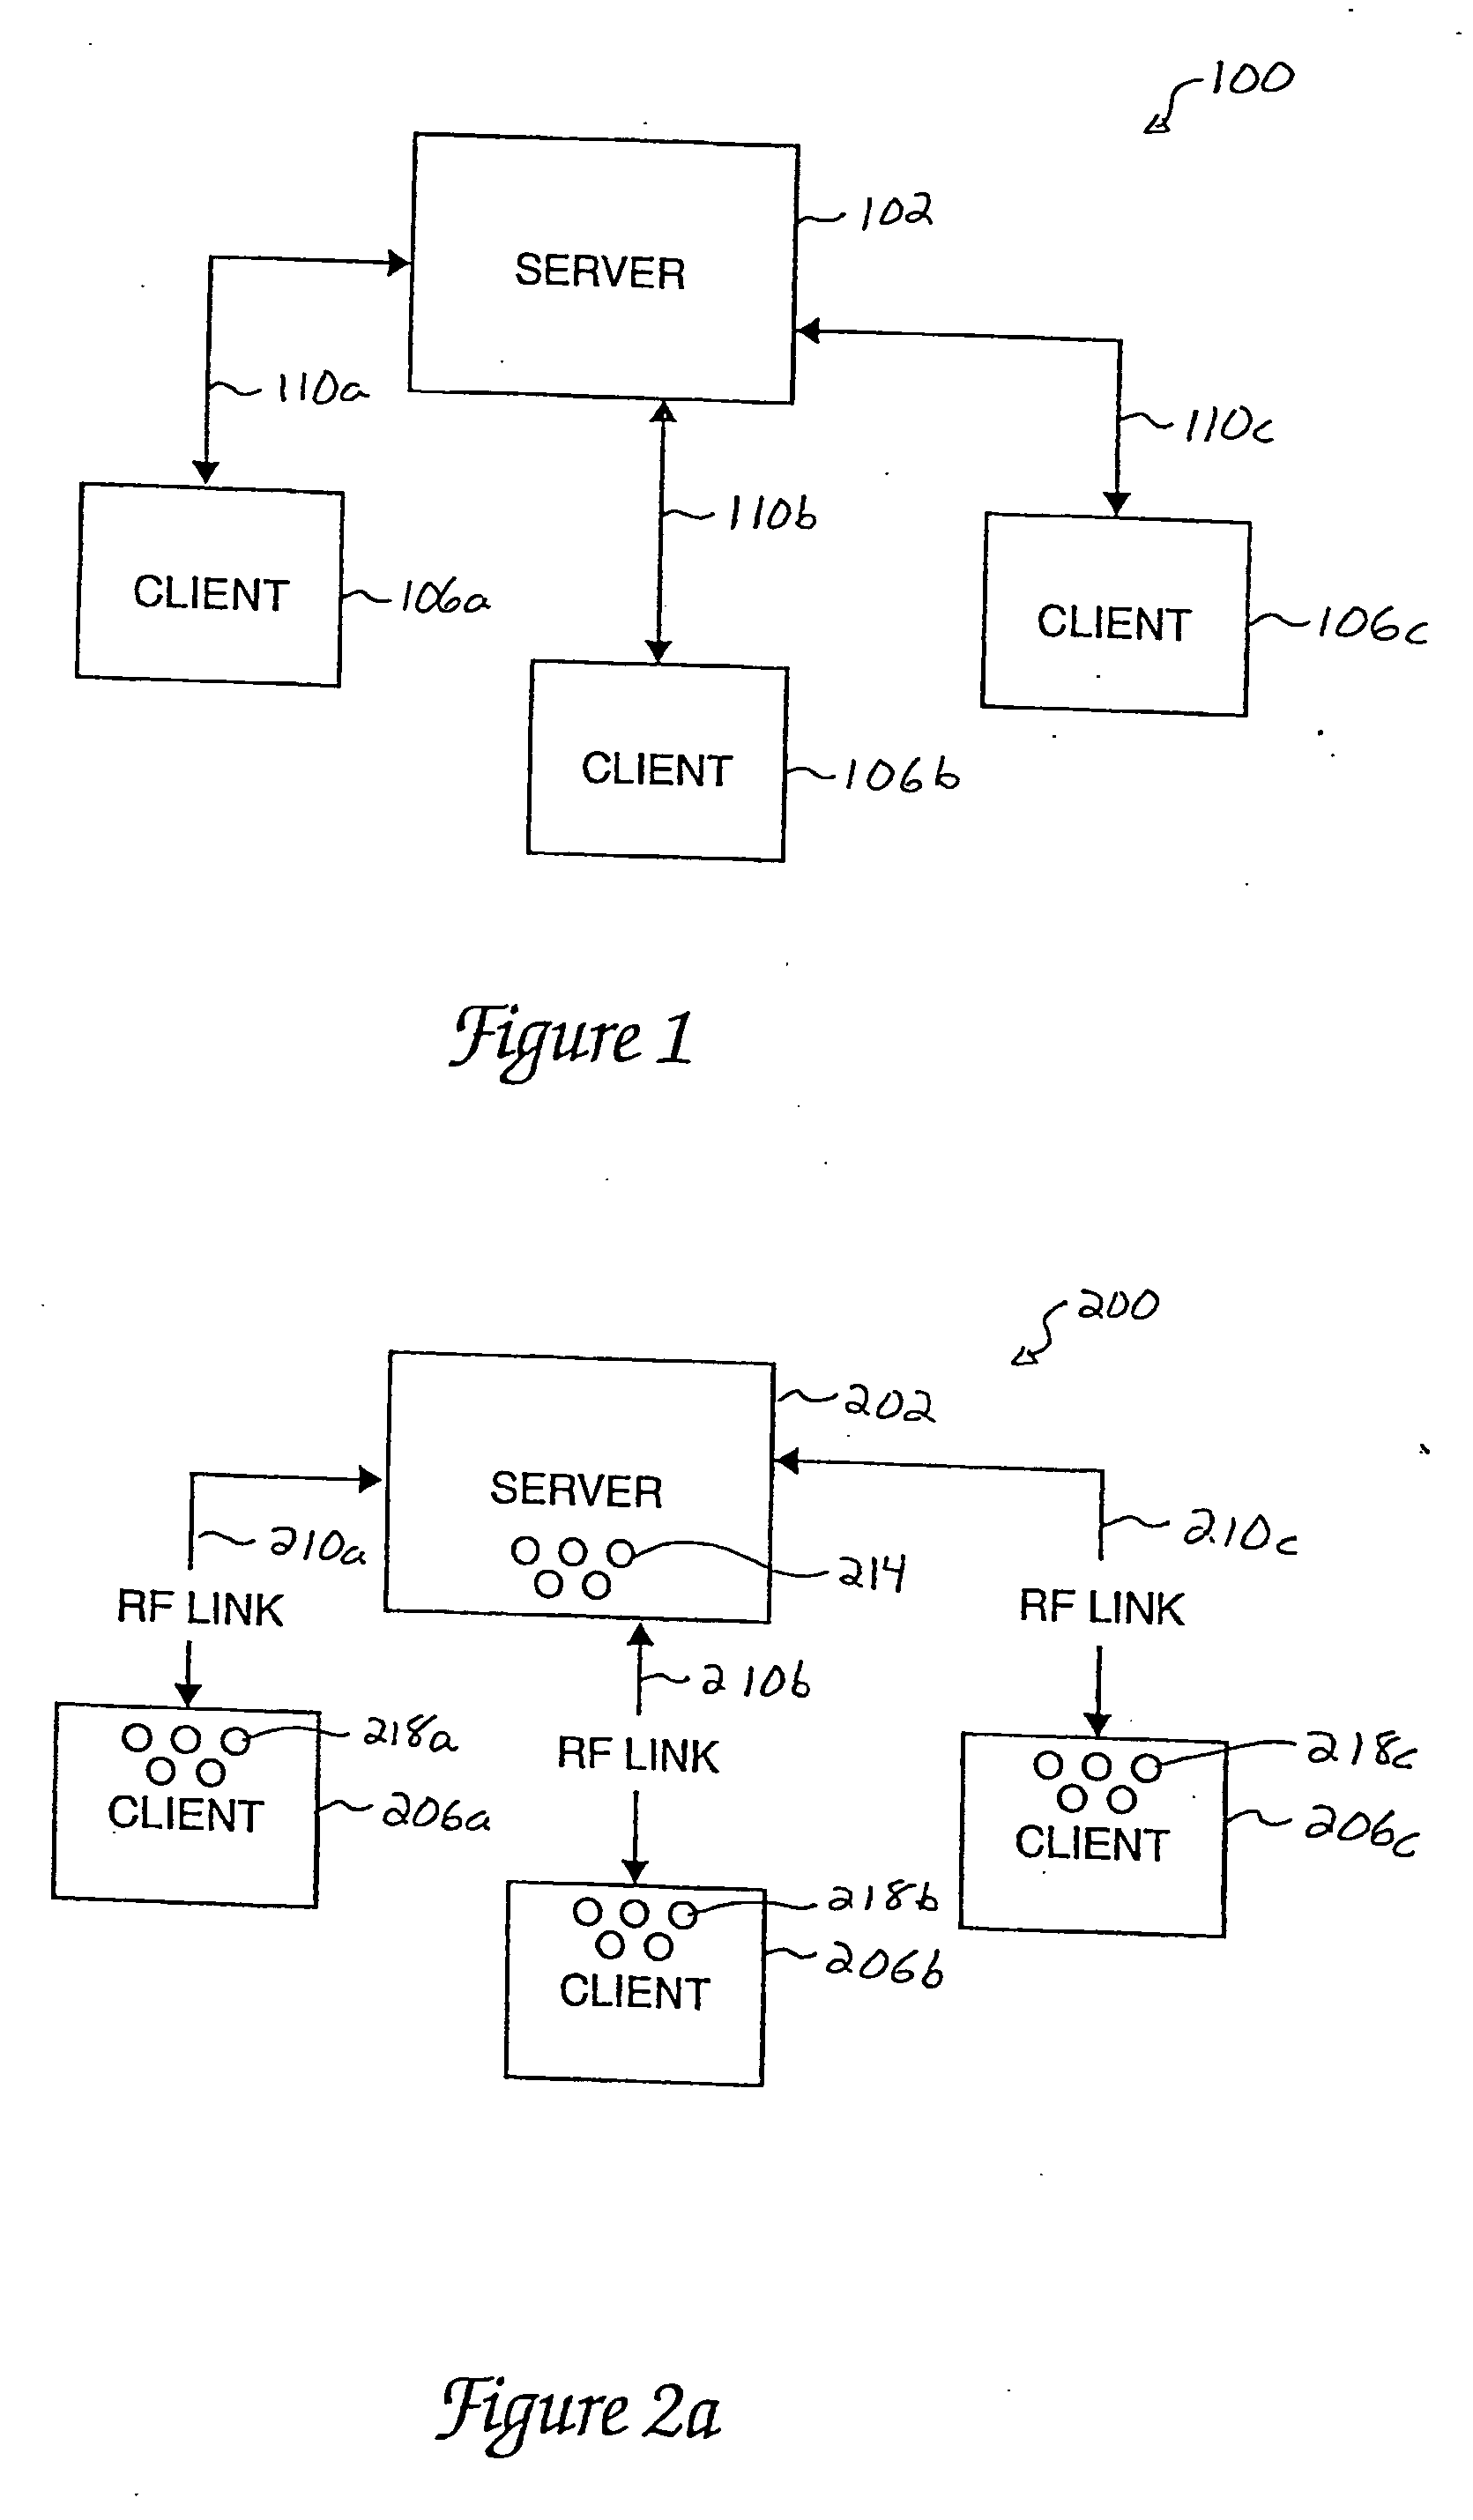 Method and apparatus for updating information in a low-bandwidth client/server object-oriented system